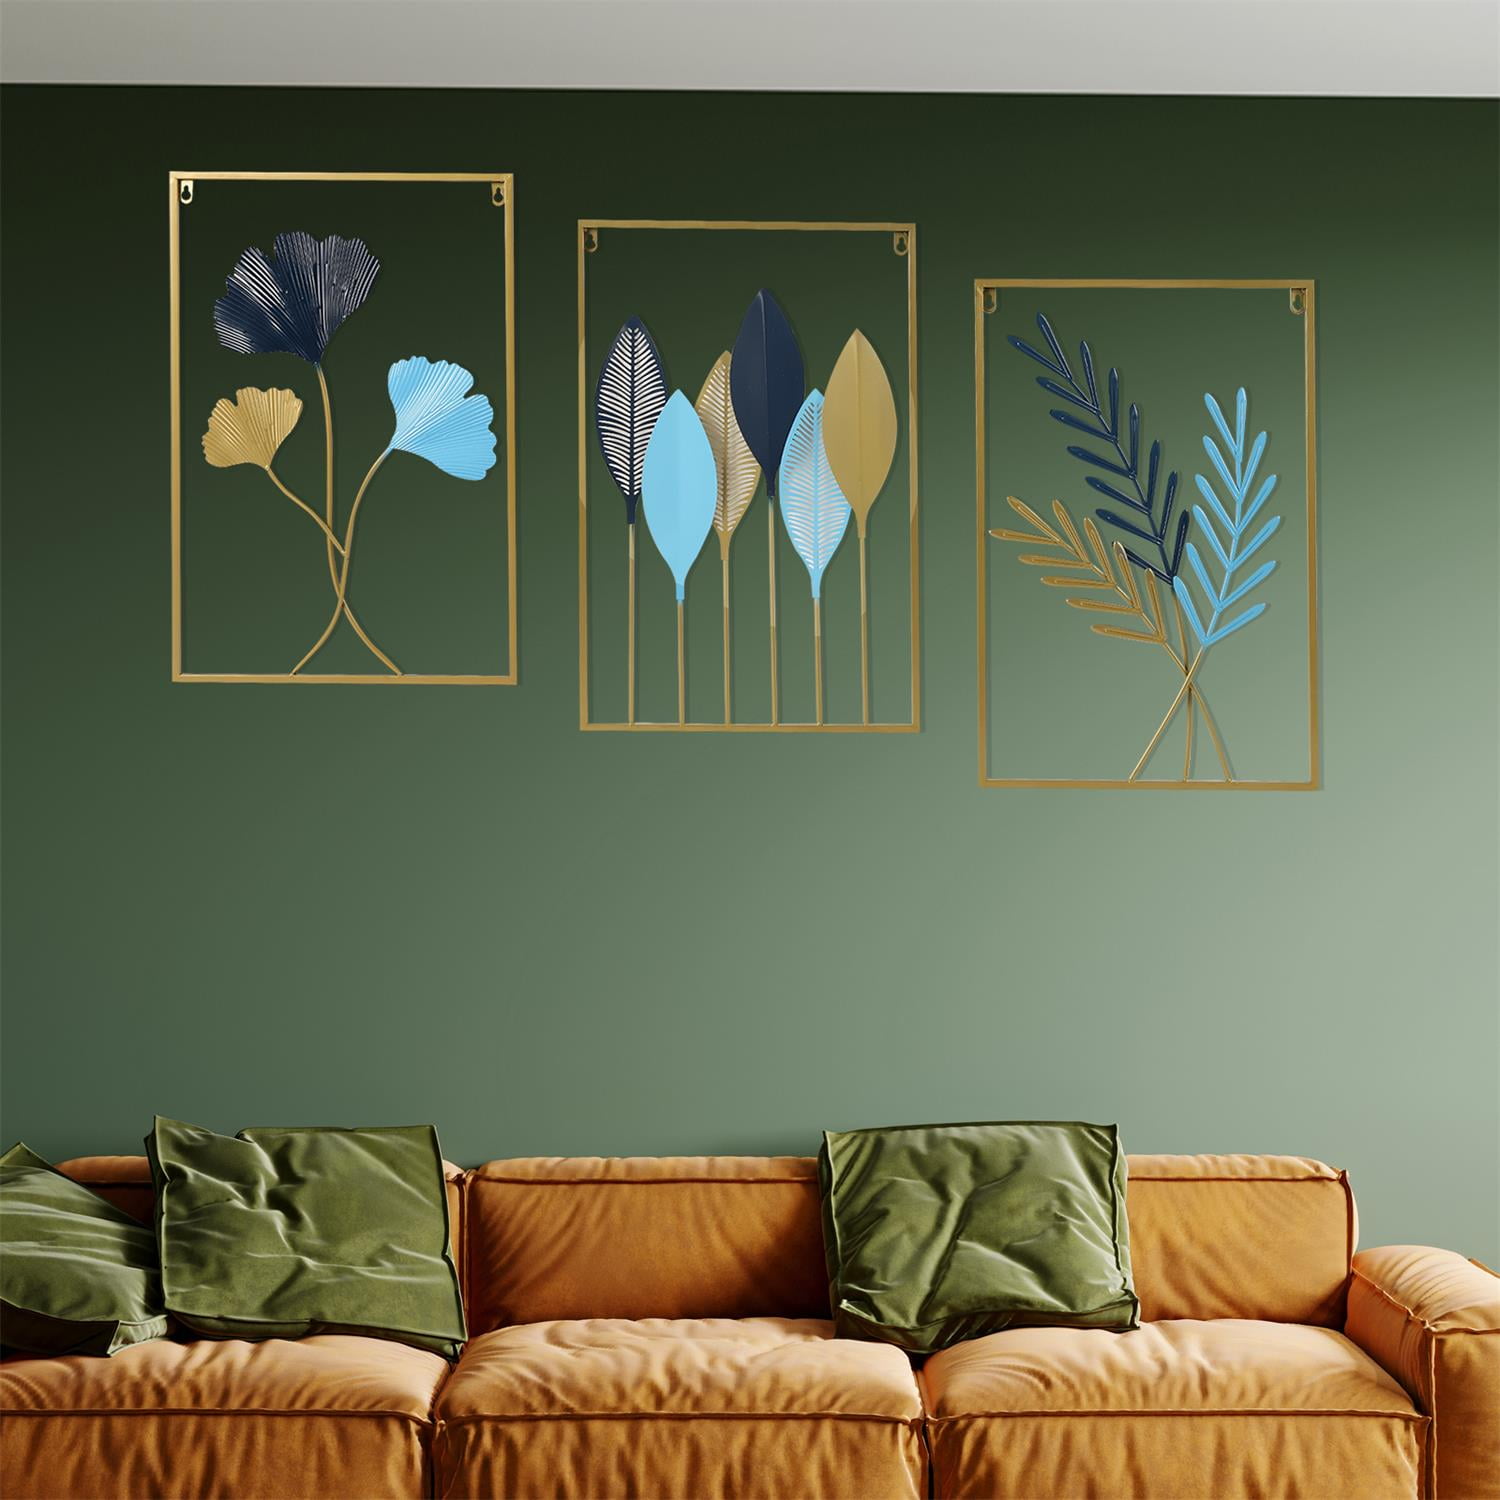 YIYIBYUS Wall Decor Set of Gold Metal Leaf Wall Art Hanging Decoration  for Living Room Office Bedroom Hotel